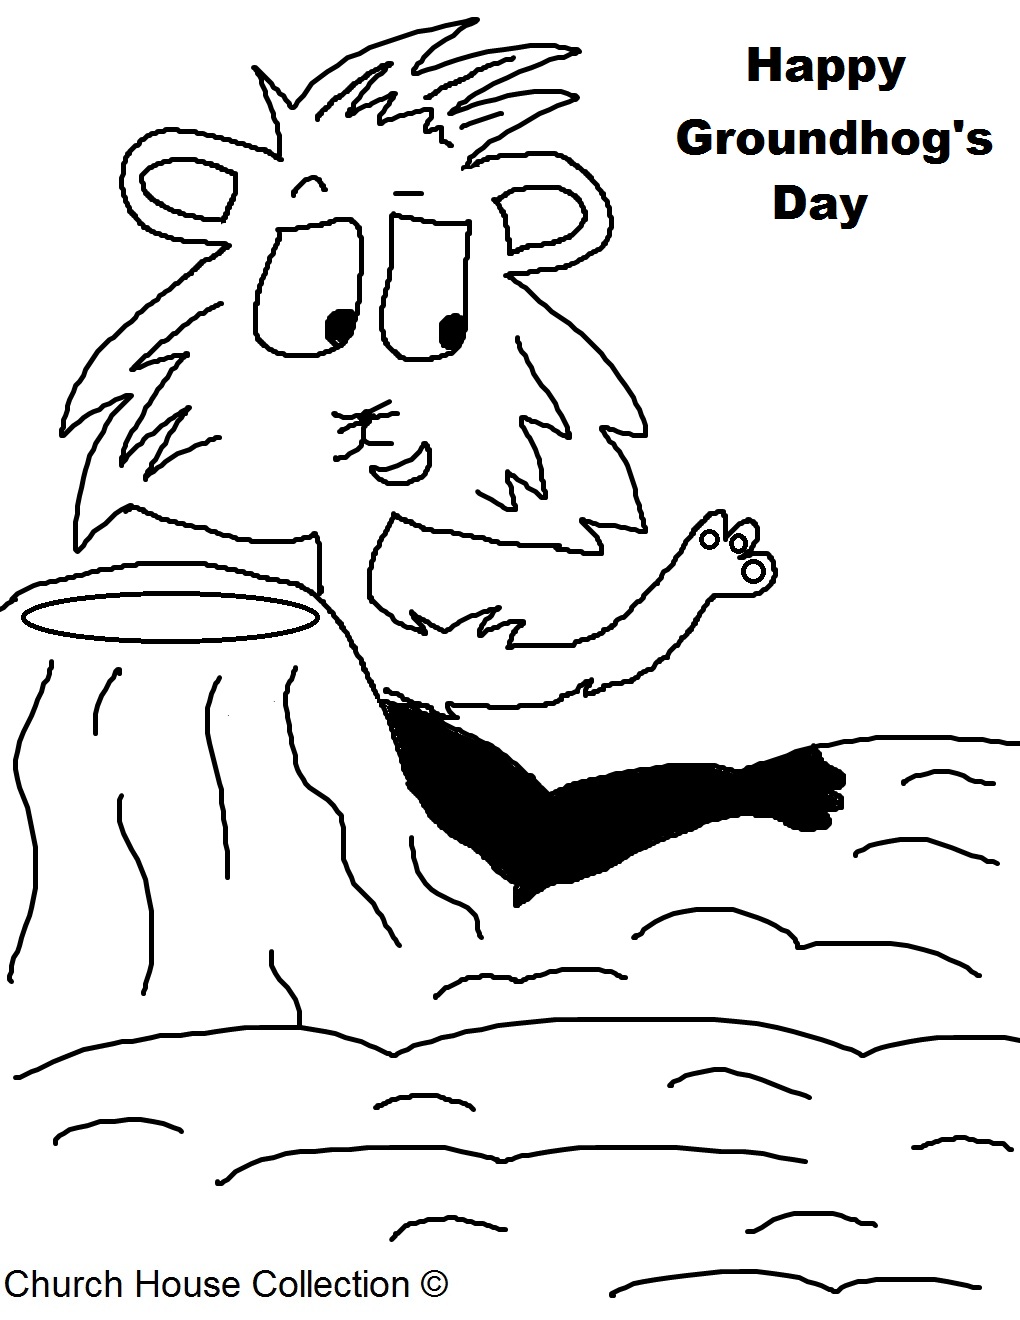 Happy Groundhog s Day Coloring Pages Groundhog Seeing Shadow